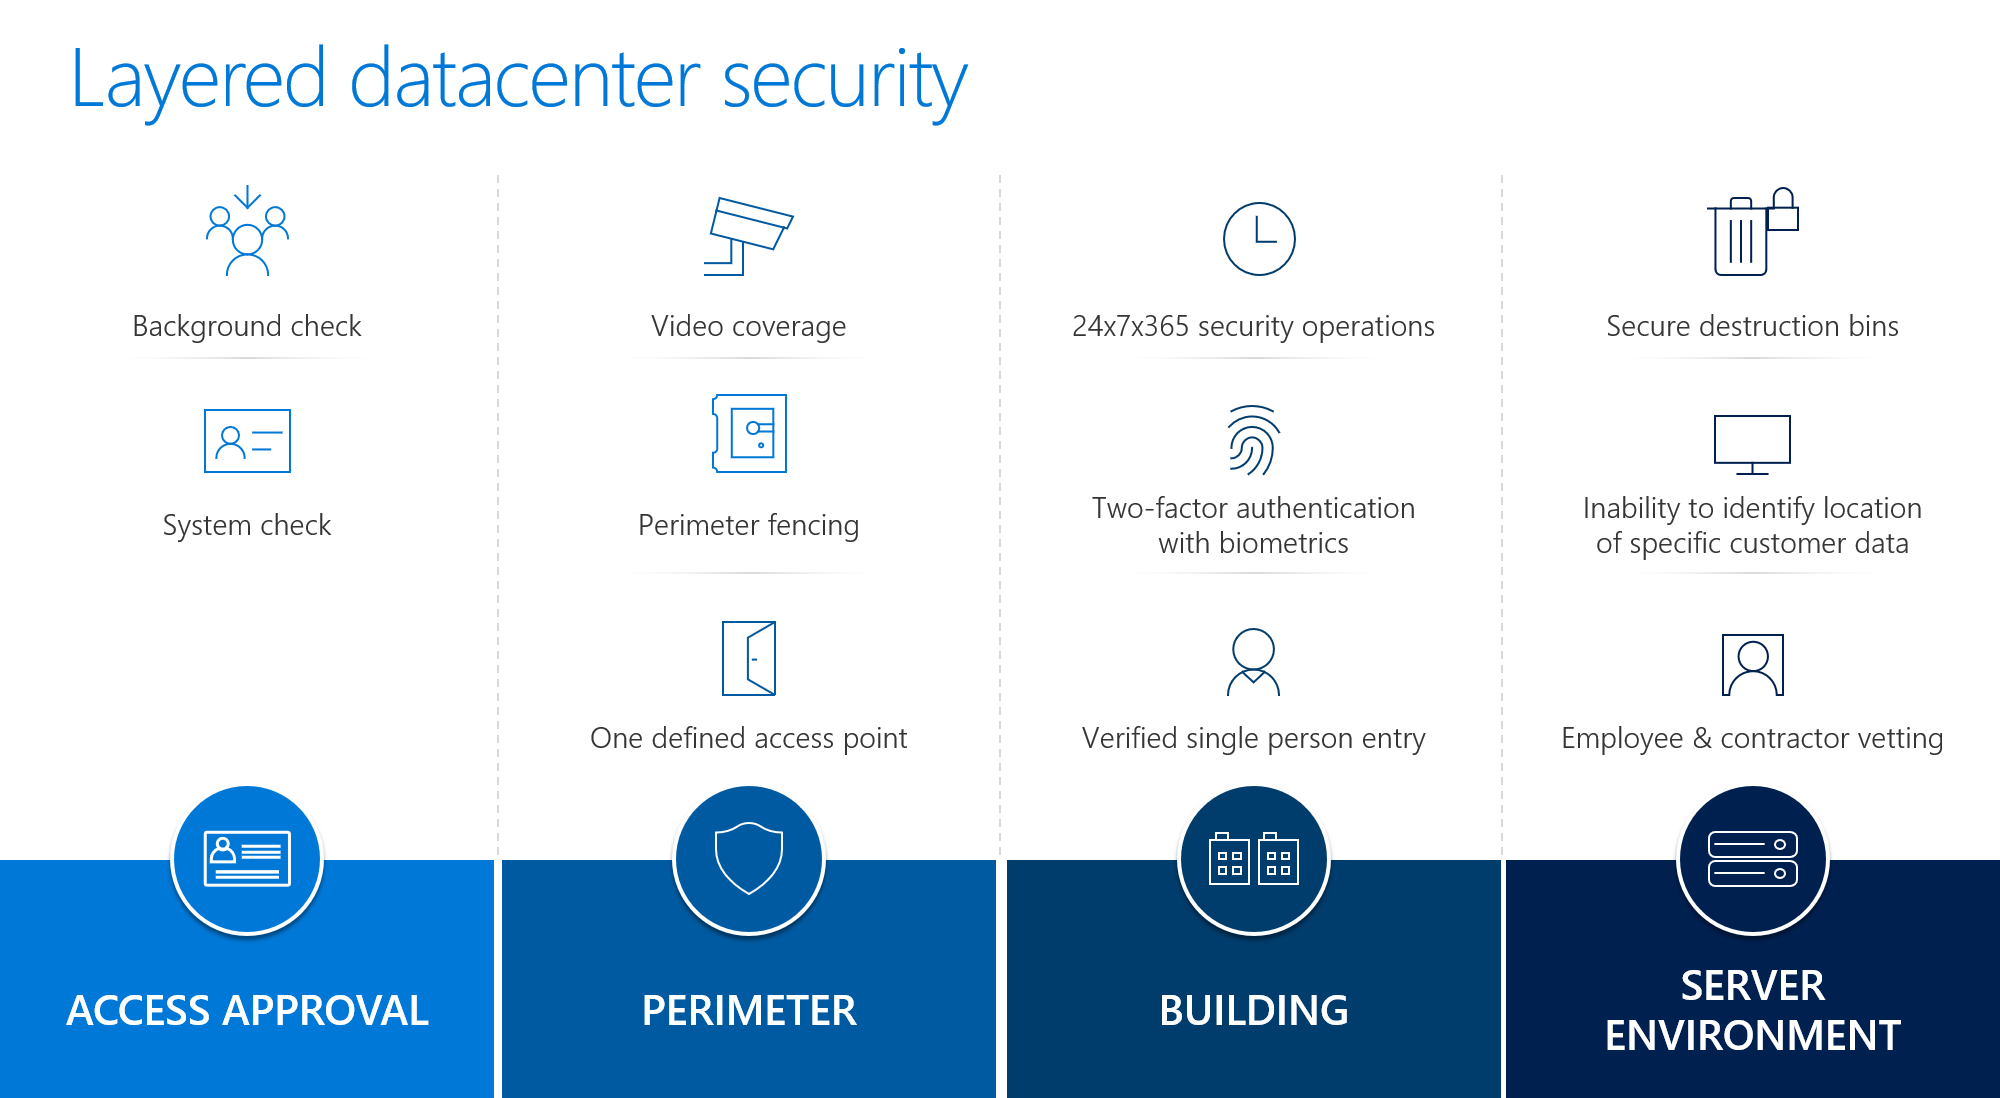 Summary of layered datacenter security approach.